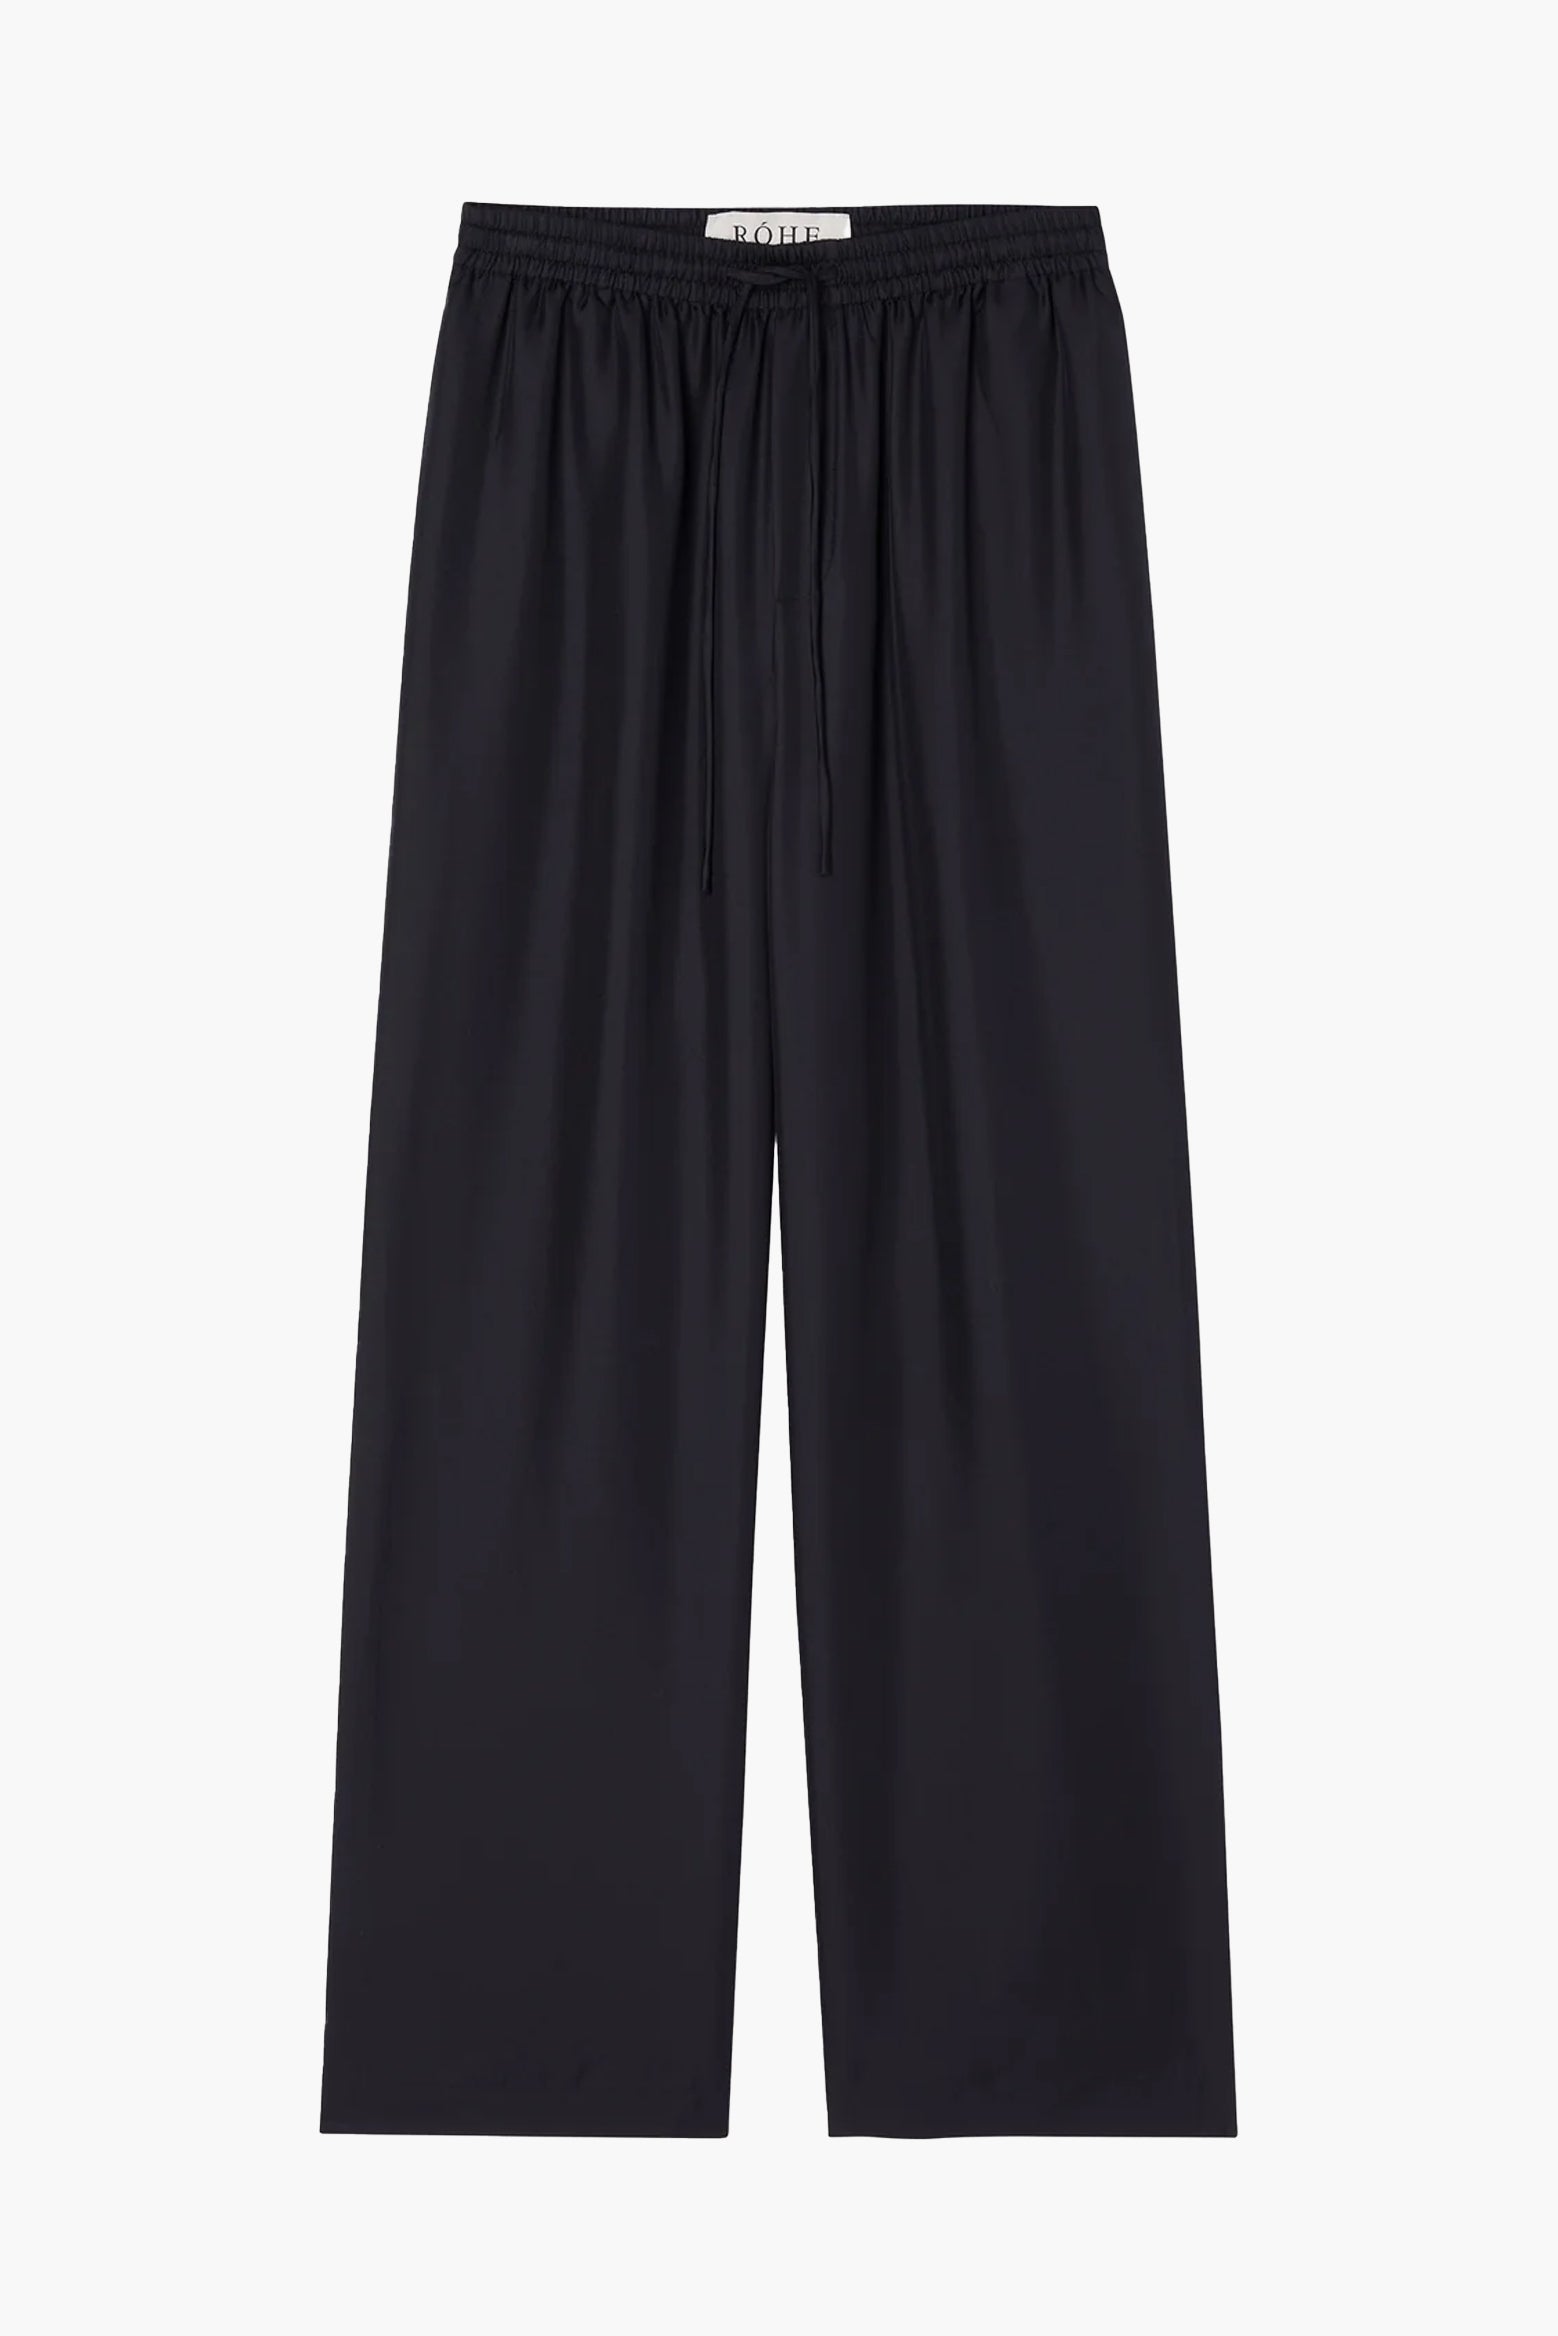 Rohe Wide Leg Silk Trouser in Noir available at The New Trend Australia. 